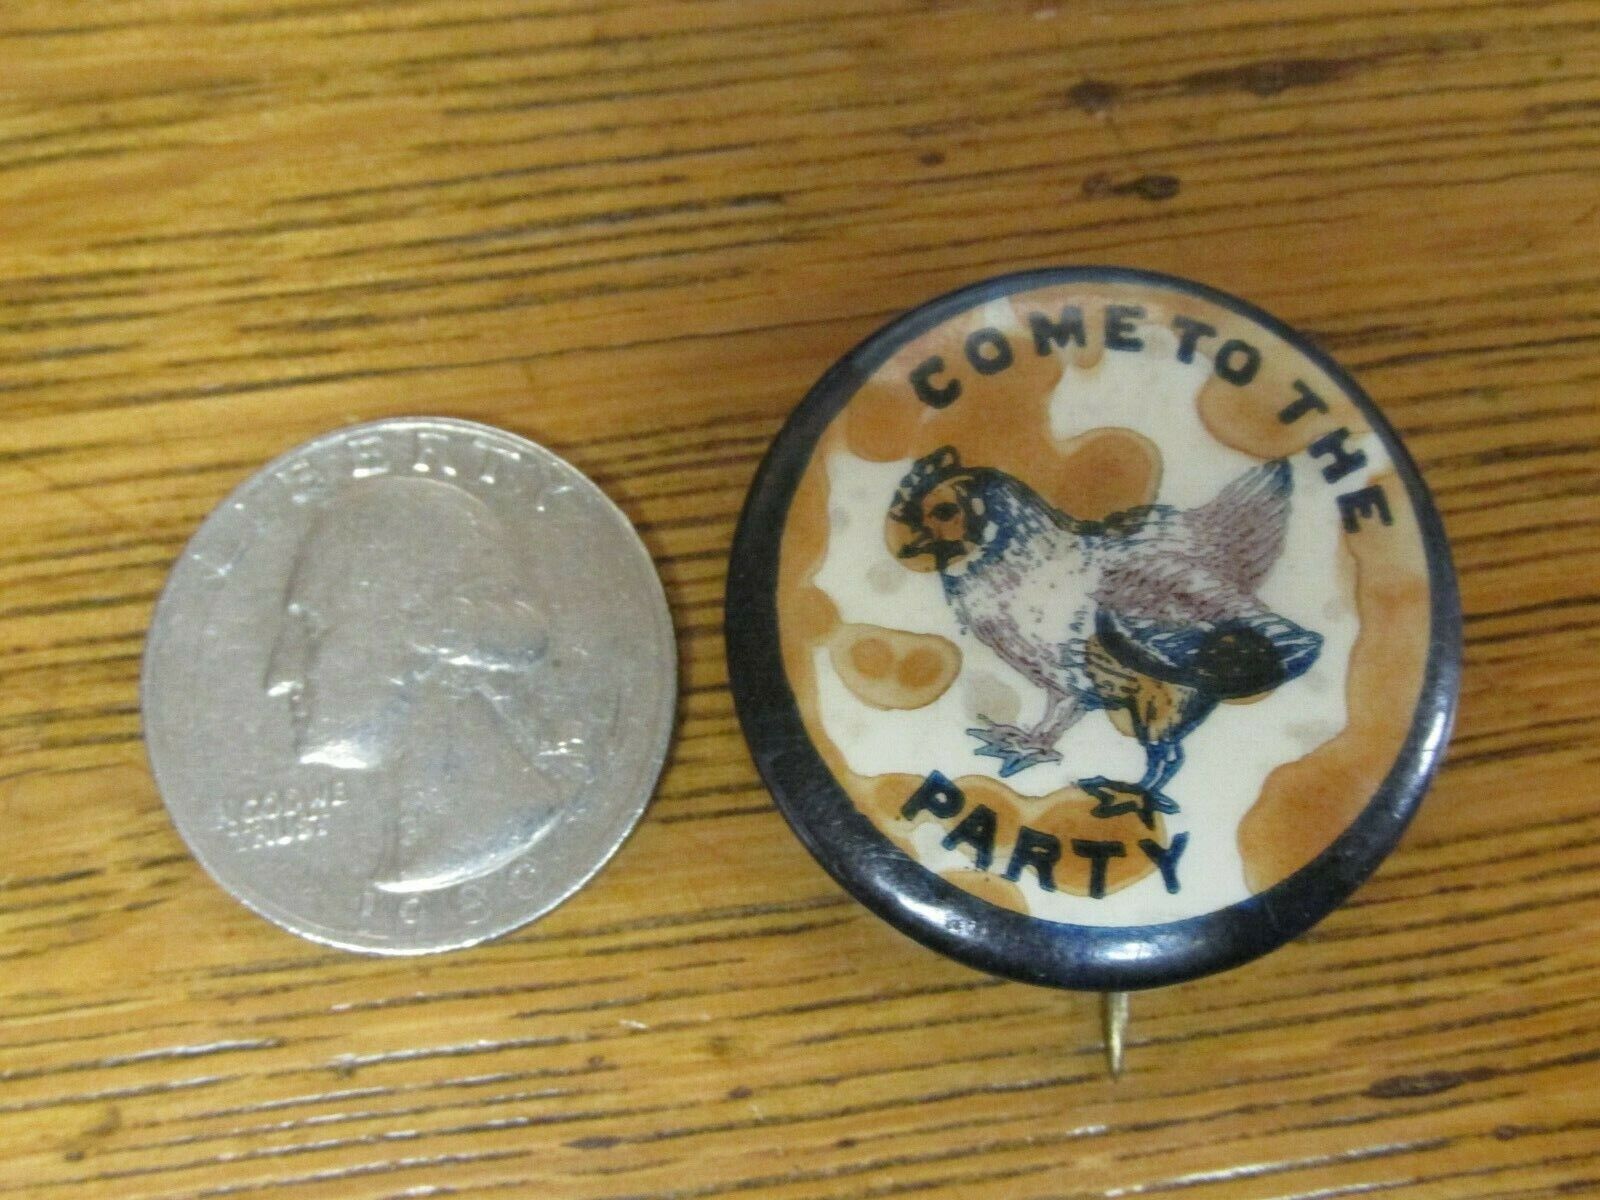 ANTIQUE RARE DEMOCRATIC POLICTICAL PINBACK COME TO THE PARTY w/ ROOSTER C.1920s